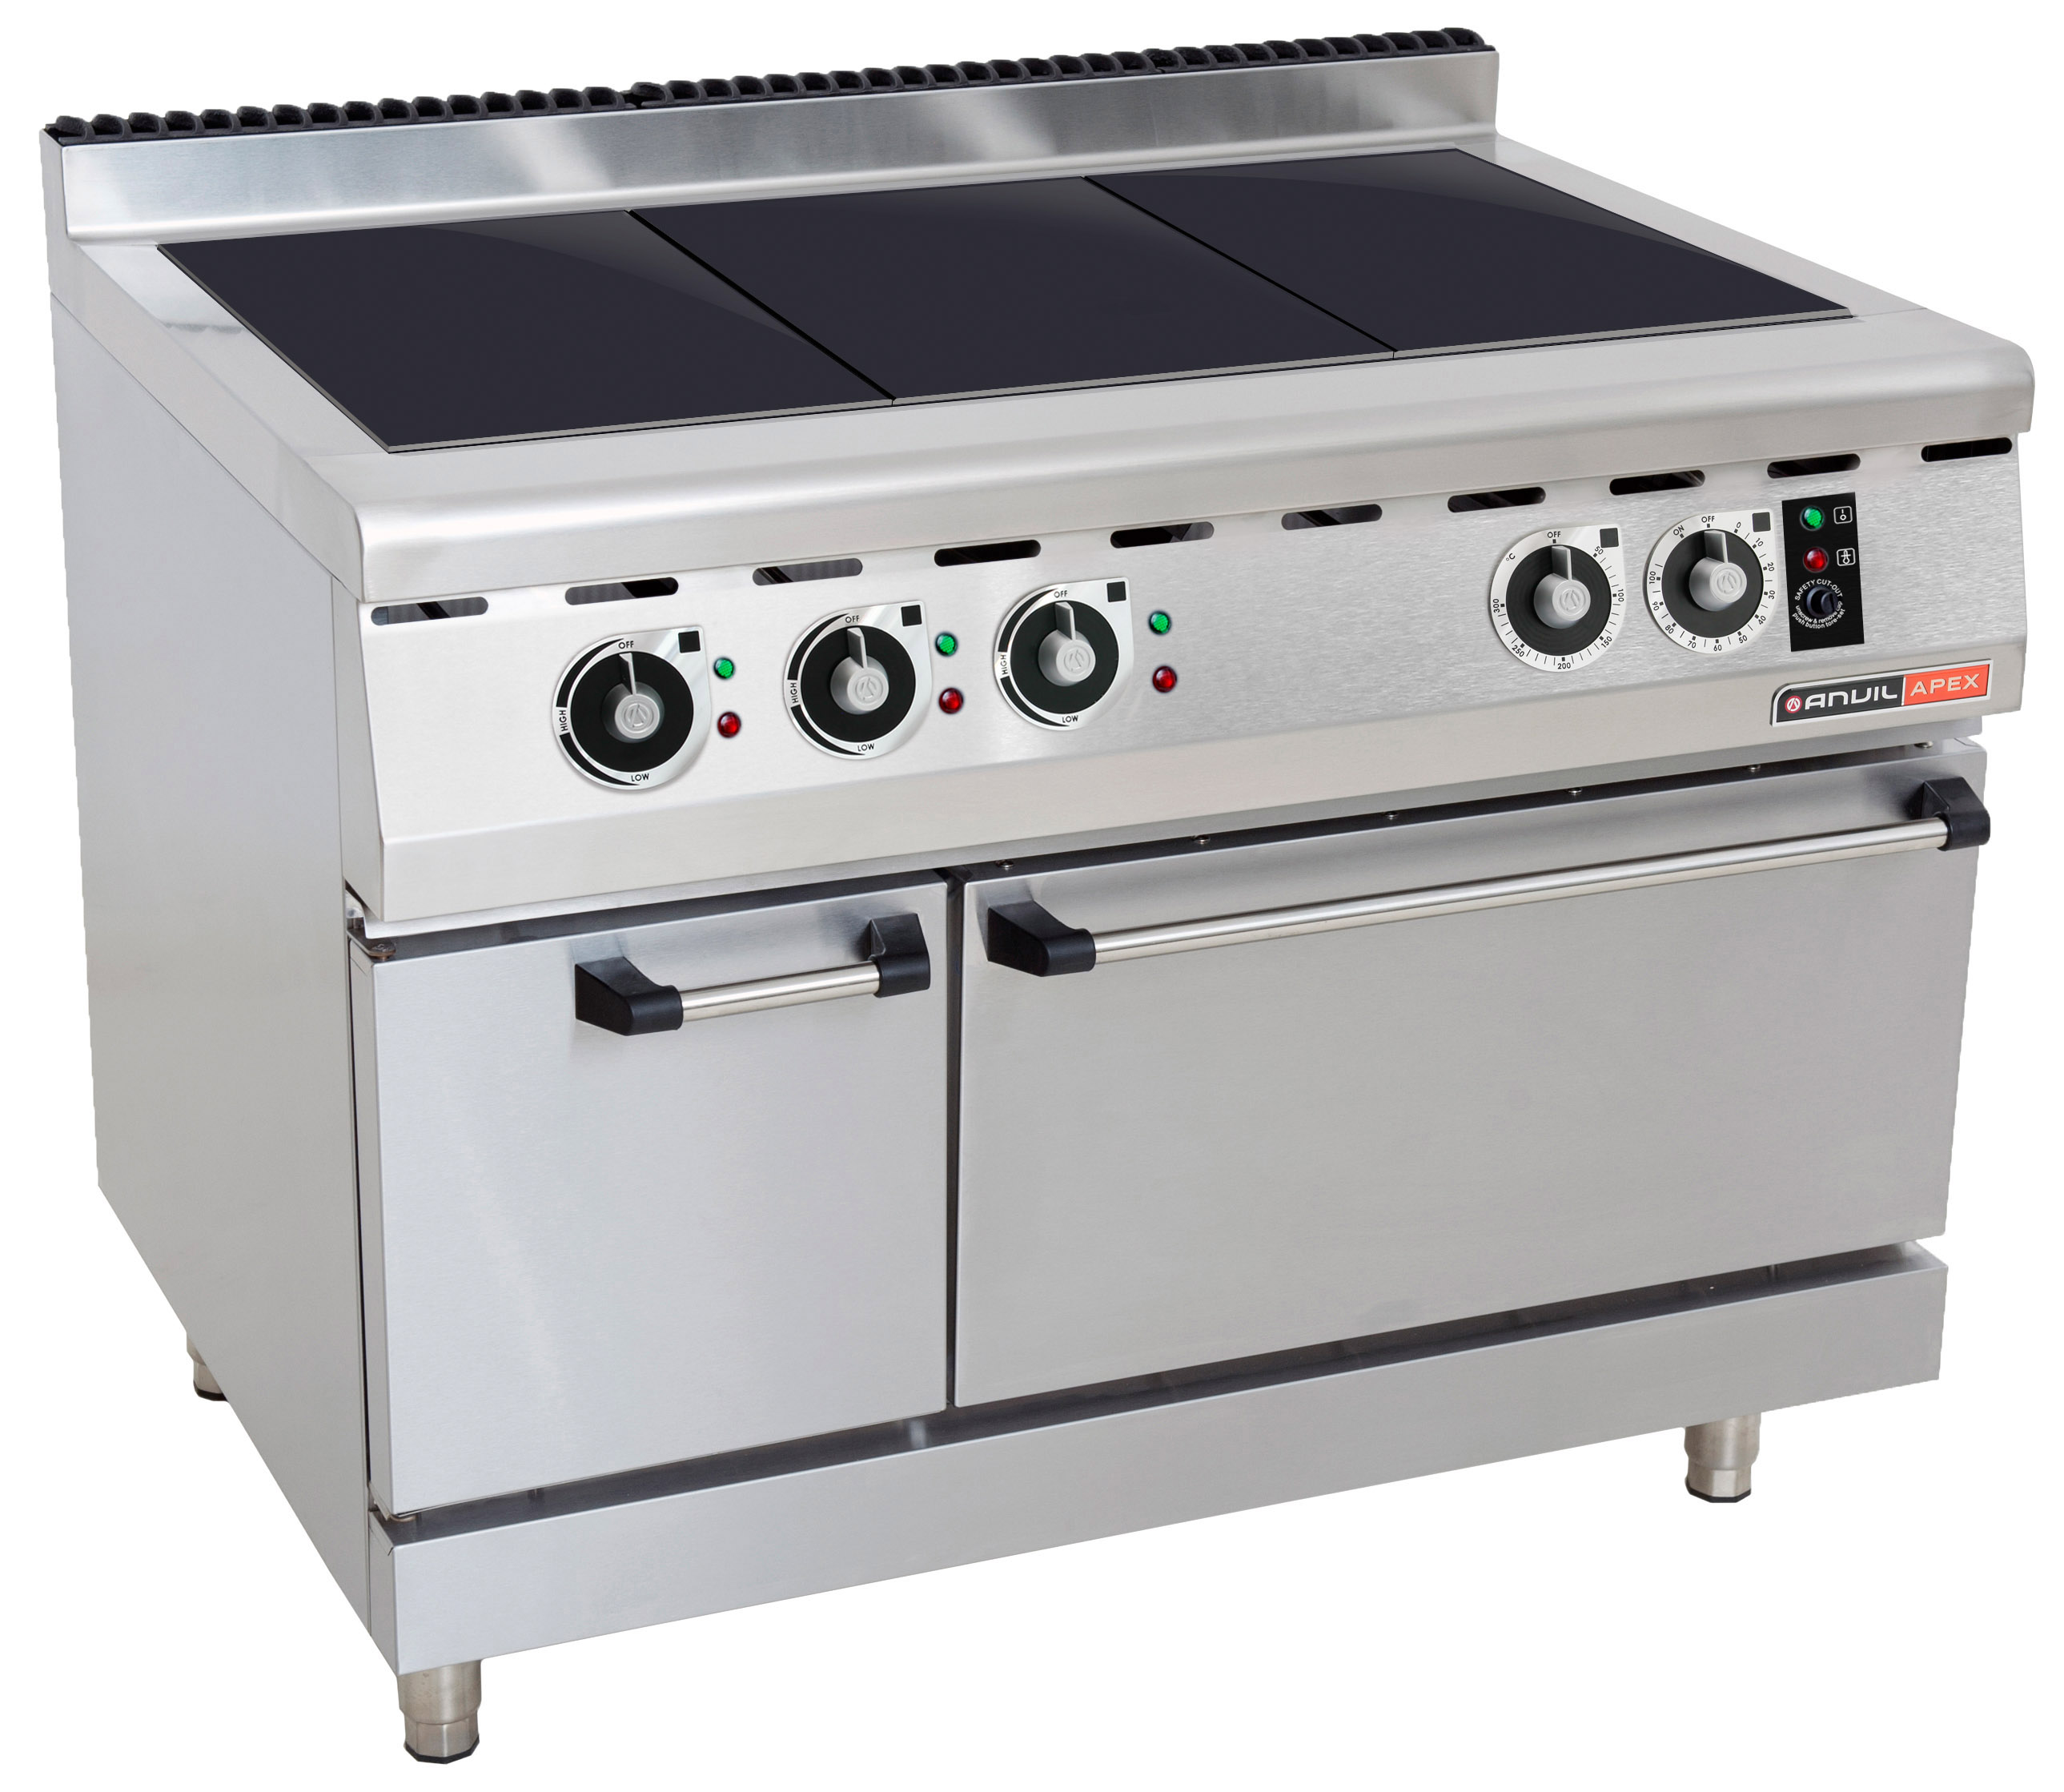 ELECTRIC SOLID TOP STOVE WITH ELECTRIC OVEN Catro Catering supplies